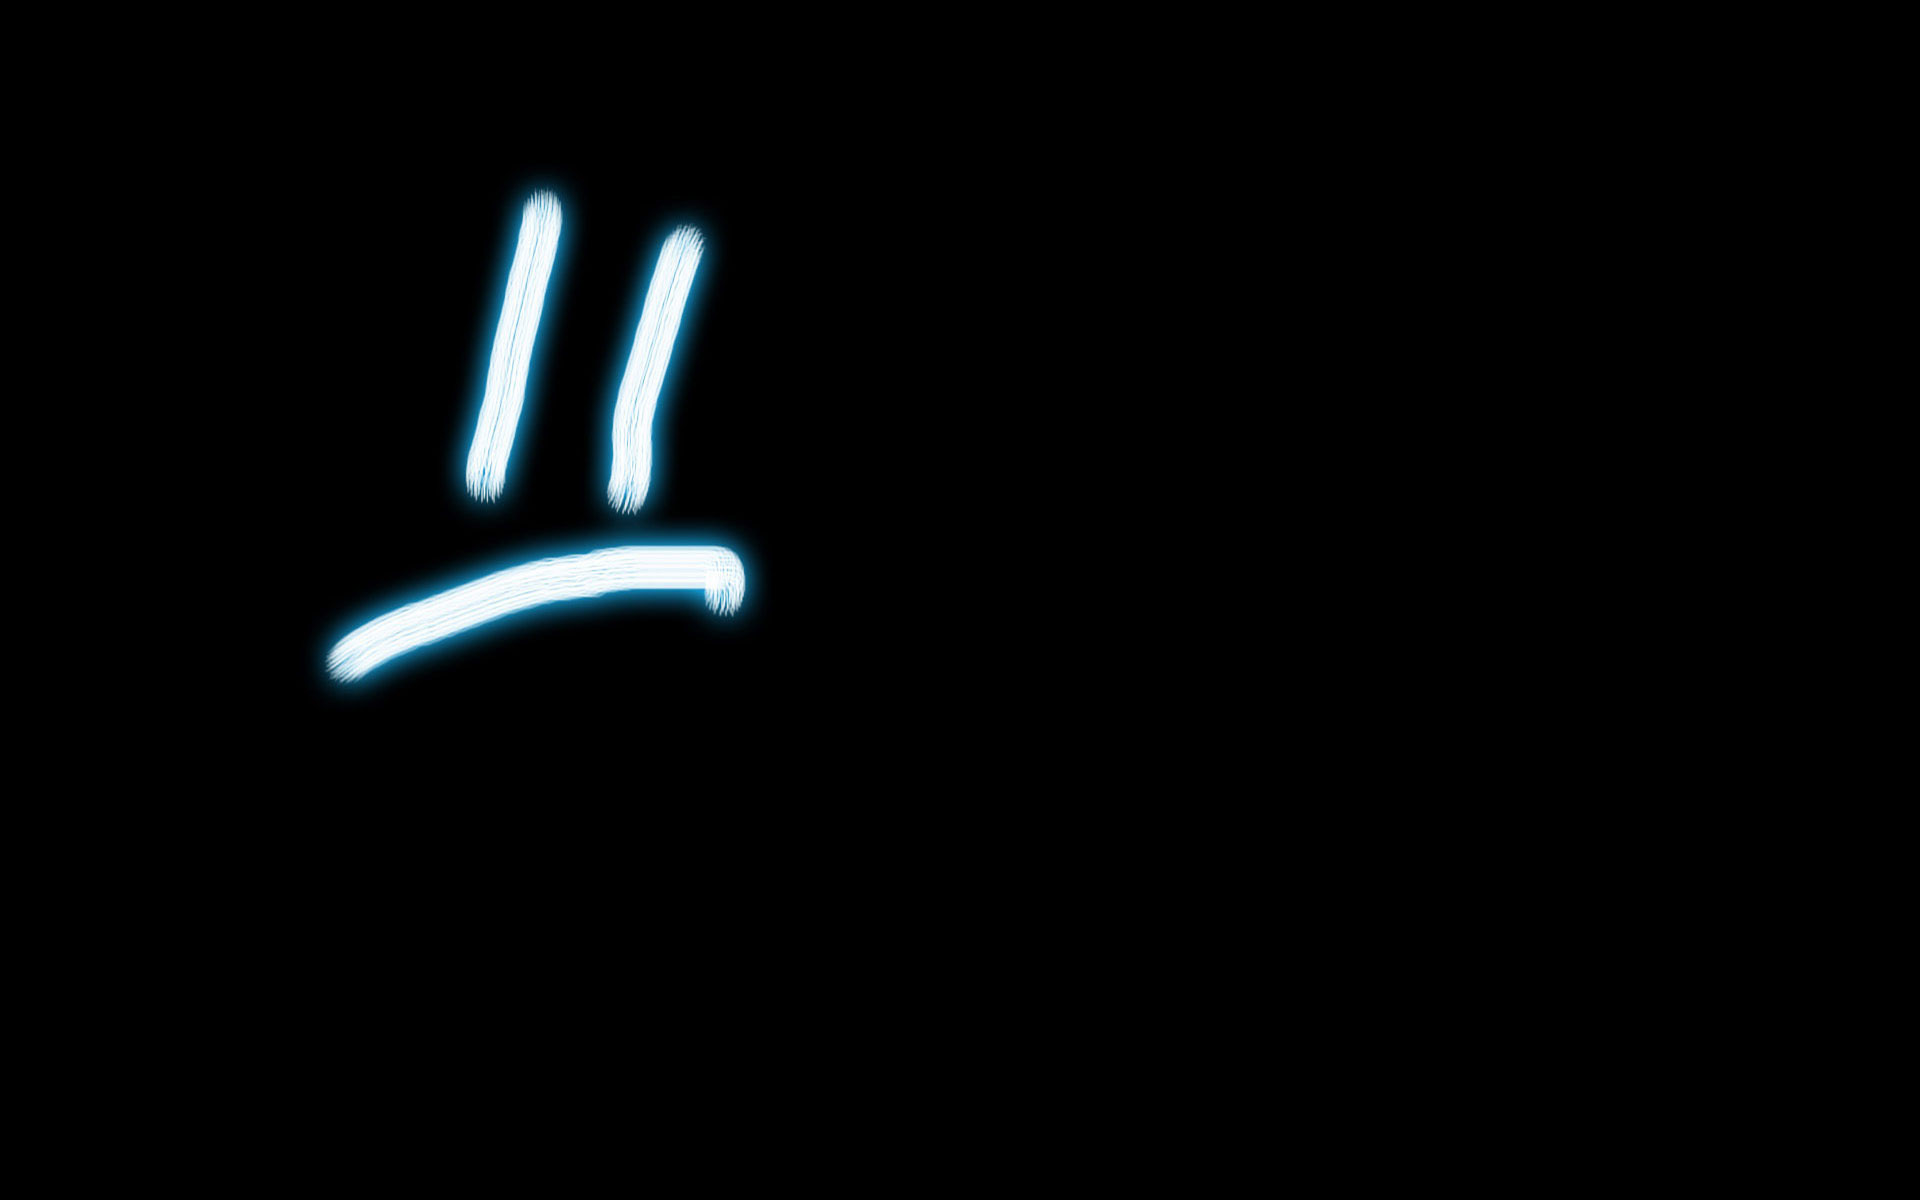 Cute Sad Face Wallpaper with Blue Background 1920x1200